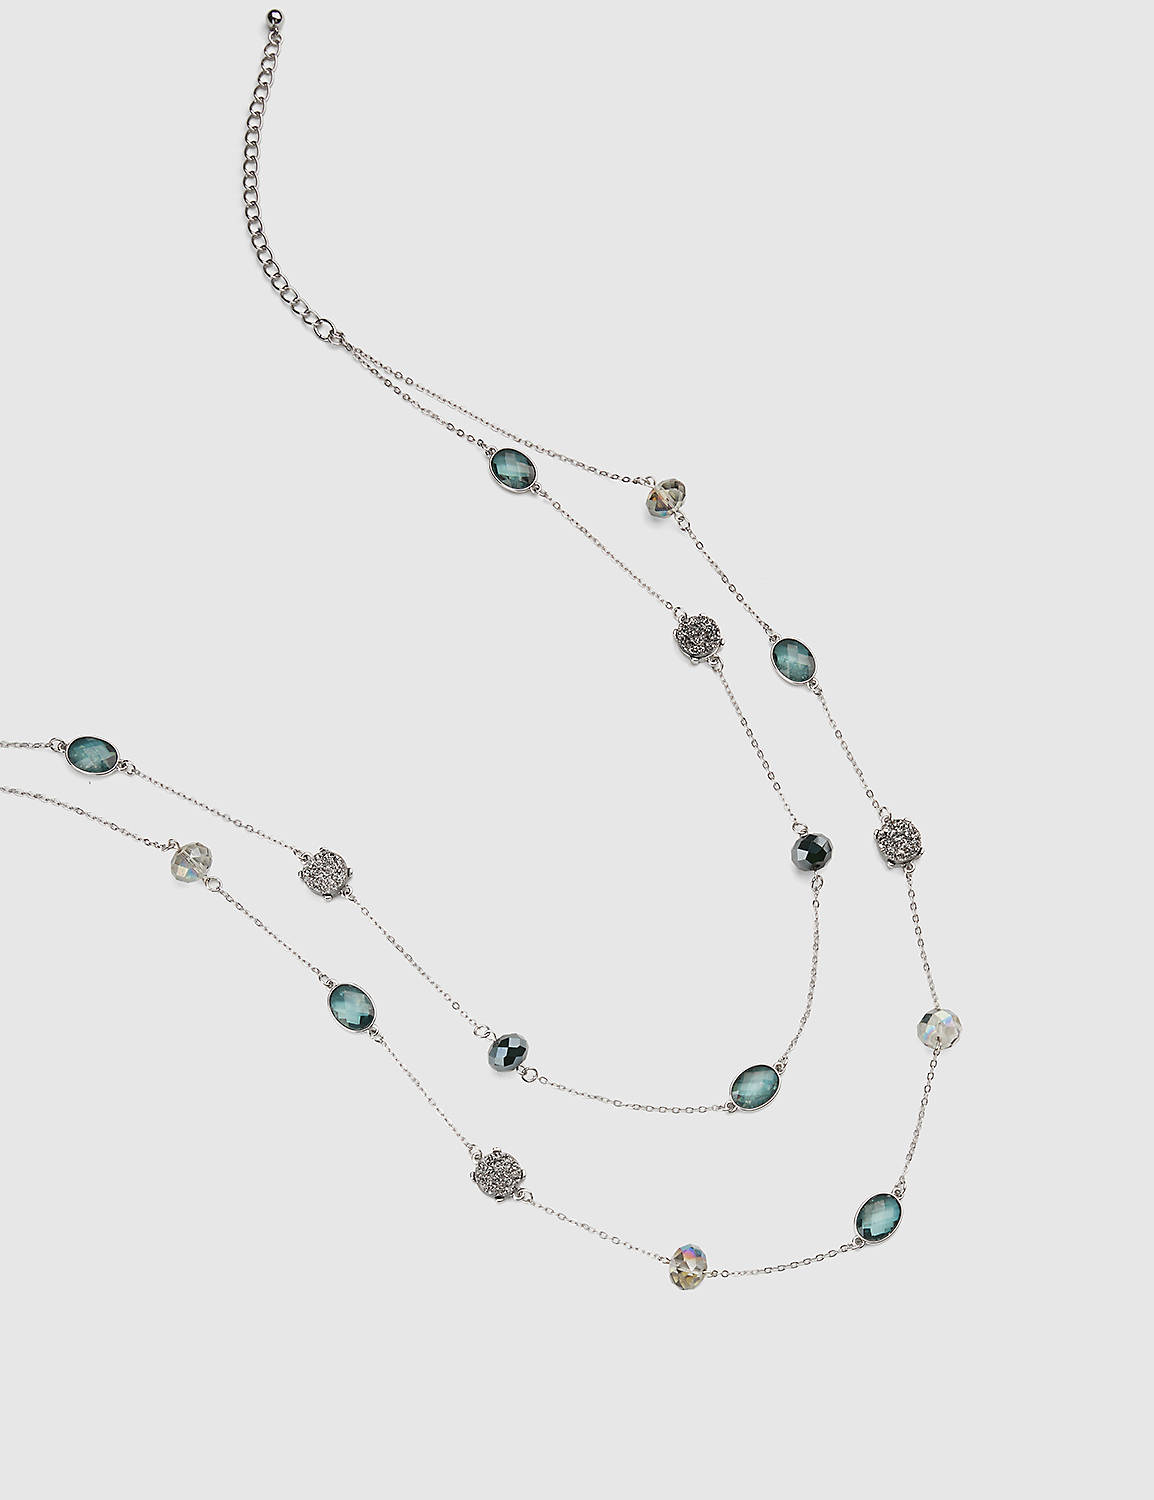 Faceted Stone Moody Jade Multi Layer Long Necklace:Moody Jade CSI 0503066:ONESZ Product Image 1